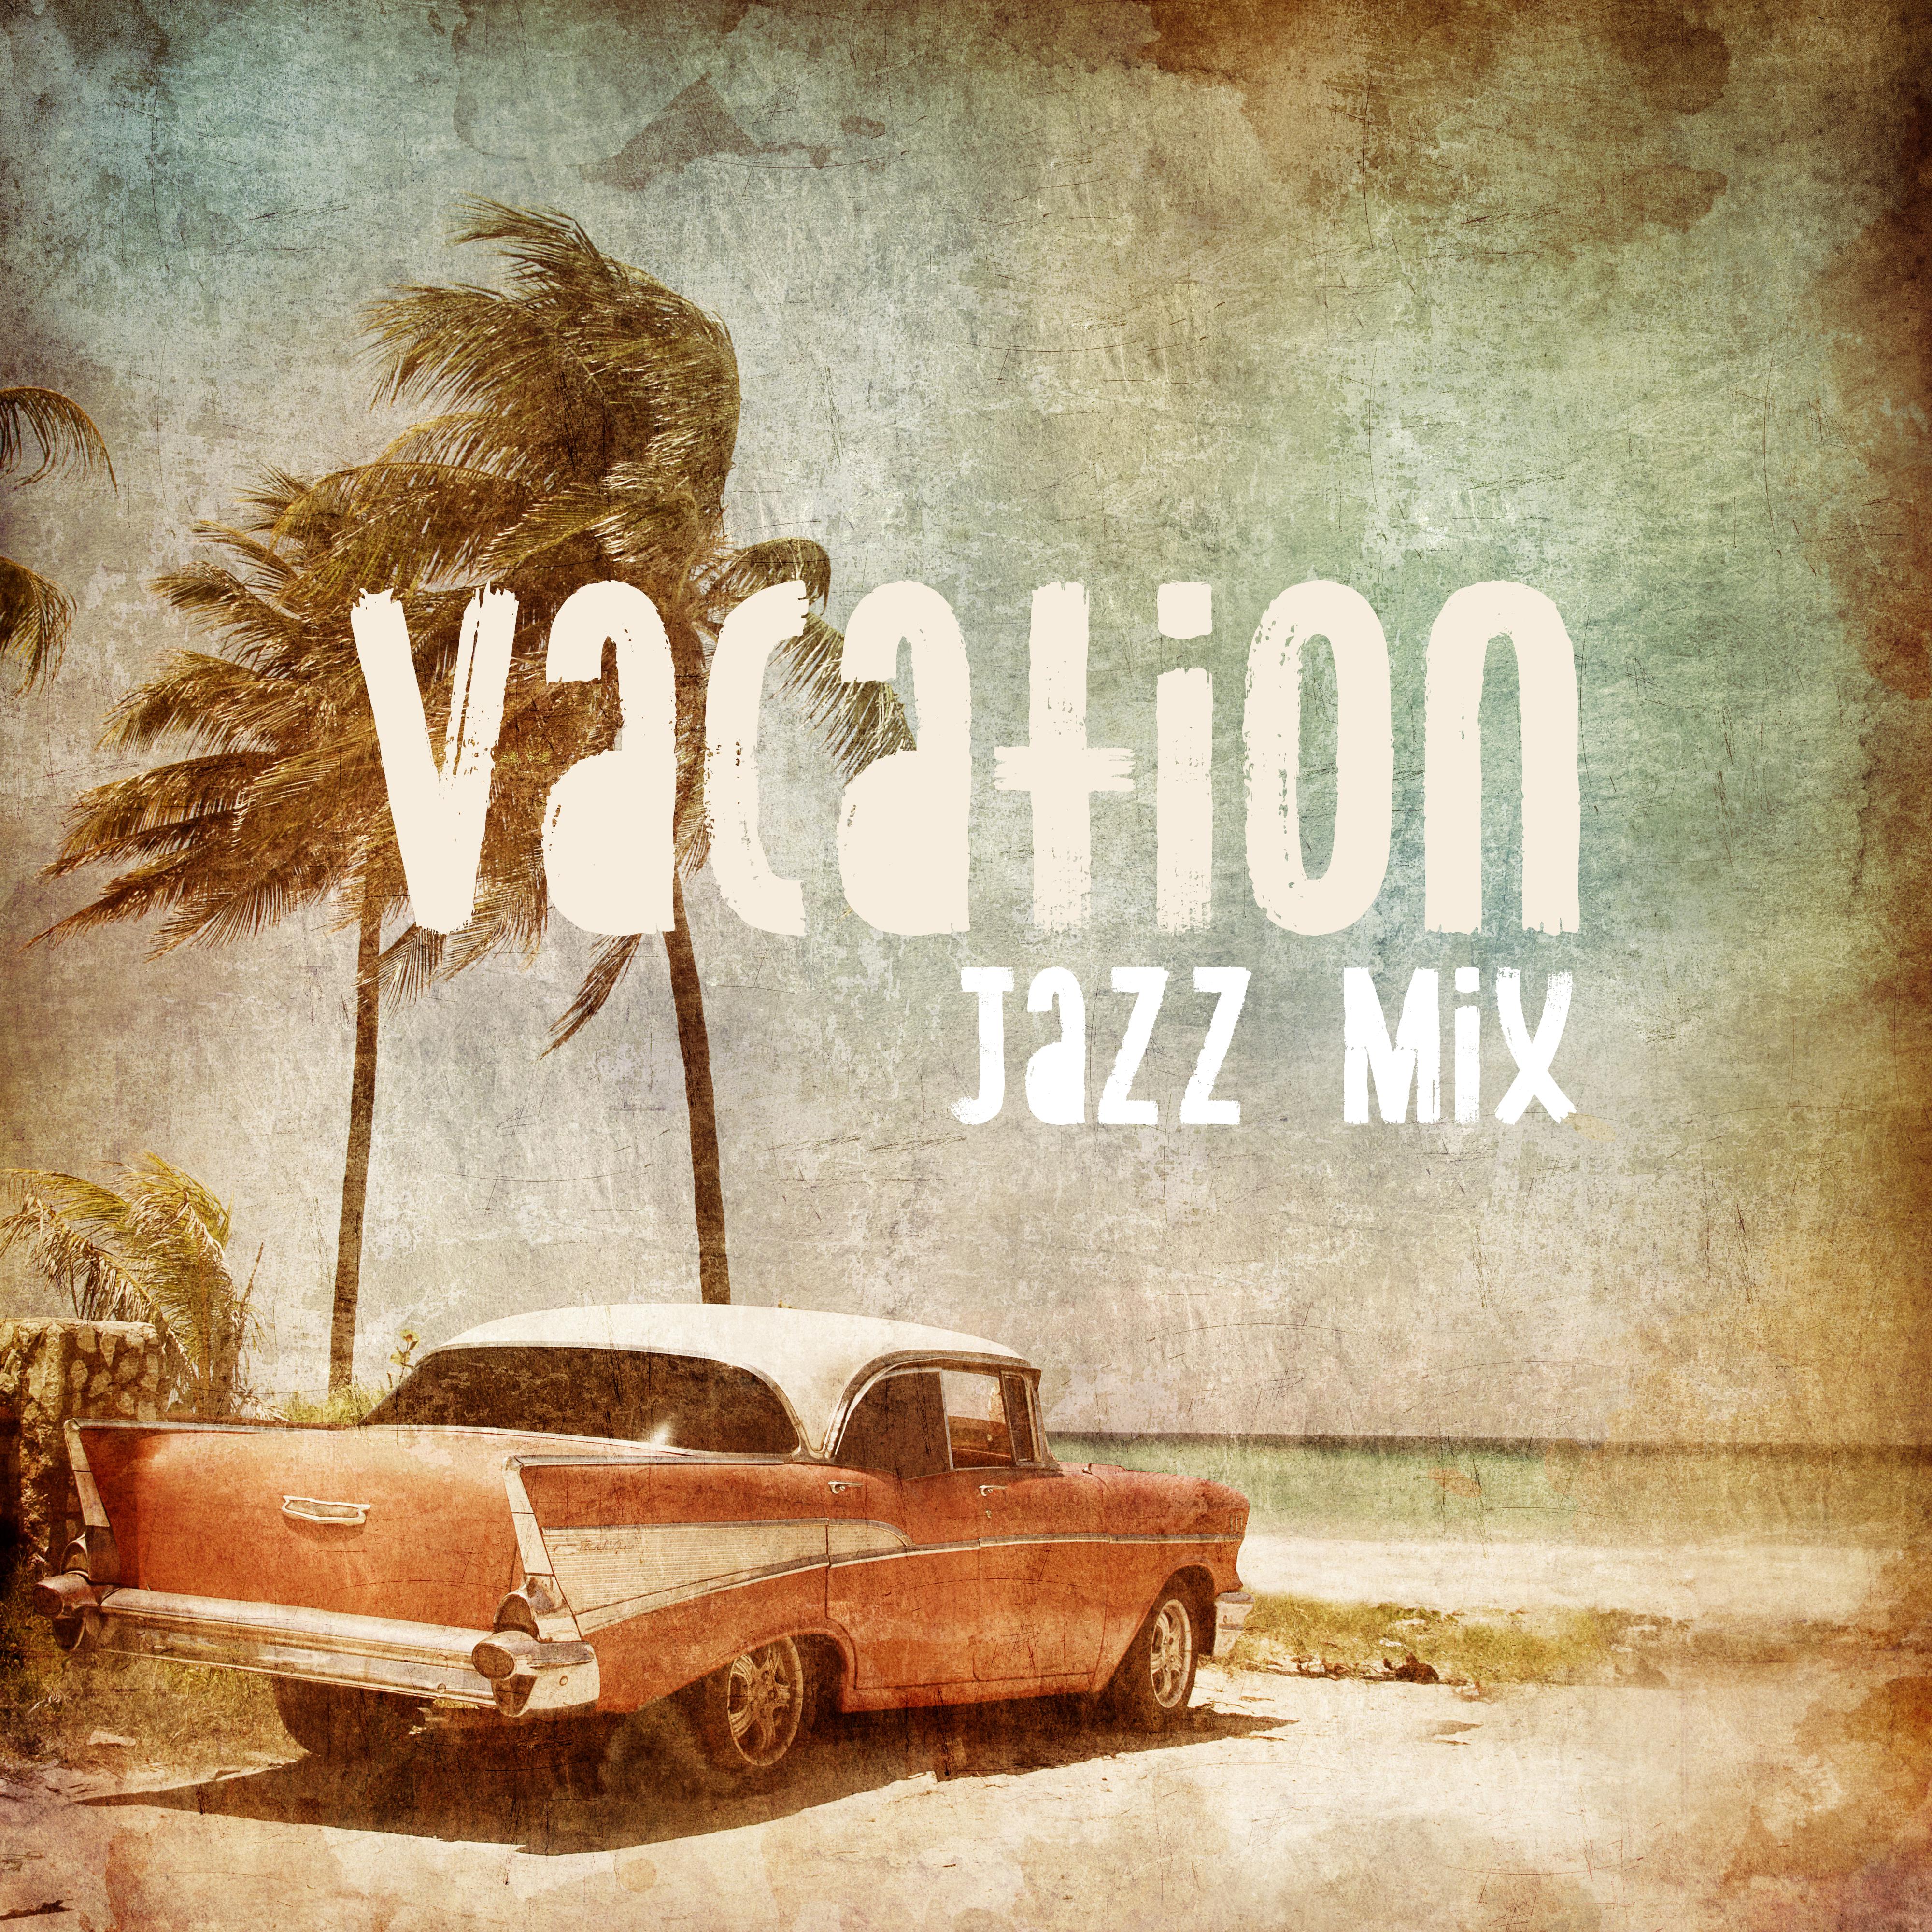 Vacation Jazz Mix: 2019 Instrumental Smooth Jazz Music Selection for Best Holiday Time Spending, Beach Party Perfect Sounds, Vintage Happy Melodies Played on Piano, Contrabass, Trumpet & Many More